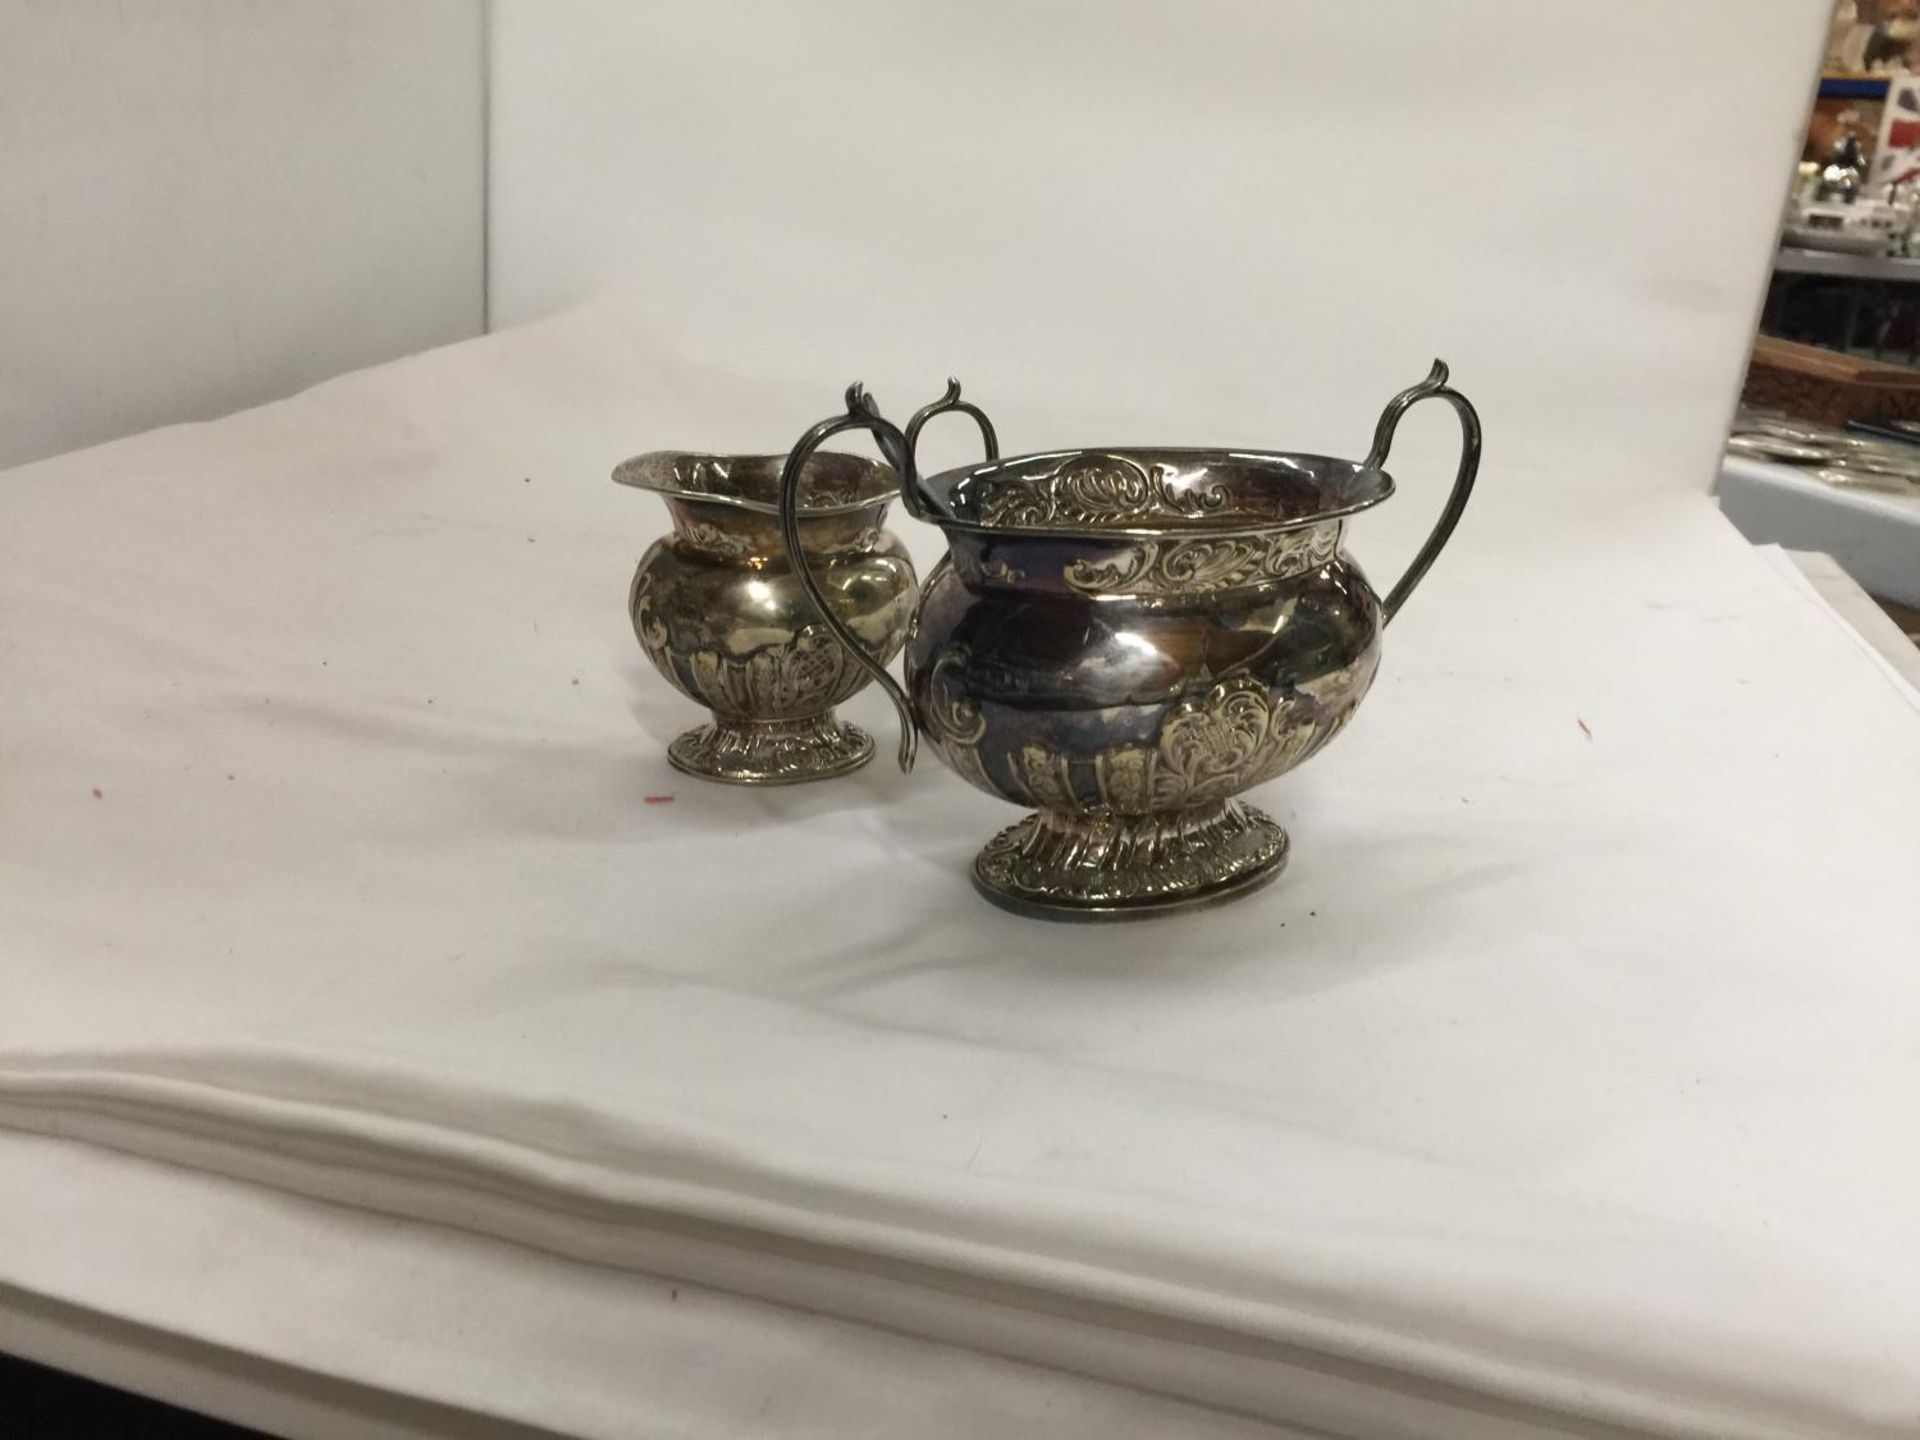 A THREE PIECE SILVER PLATED TEASET TO INCLUDE A TEAPOT, SUGAR BOWL AND CREAM JUG PLUS A COFFEE POT - Image 5 of 6